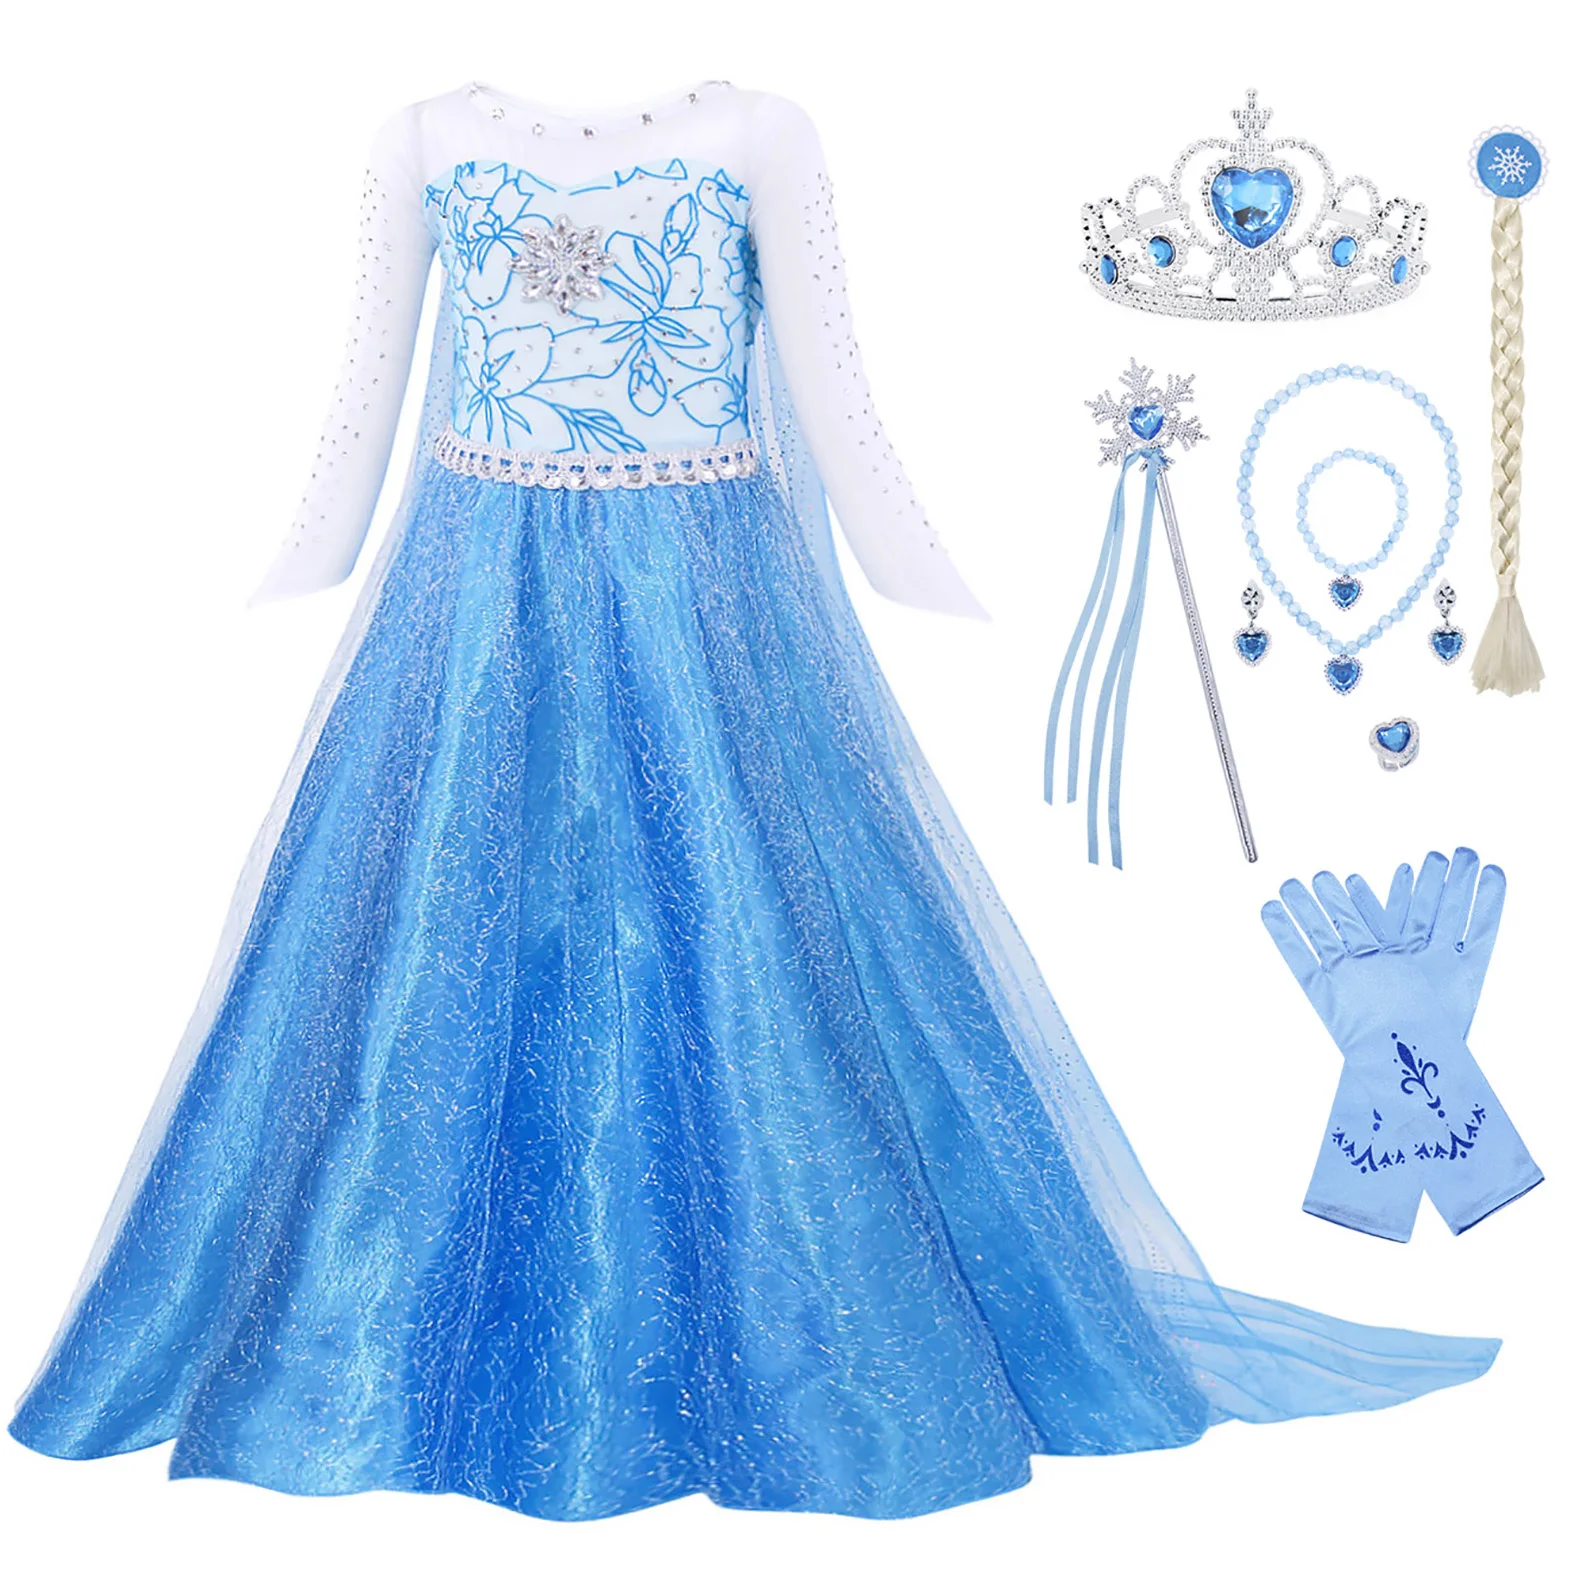 

Frozen Snow Queen Princess Elsa Anna Cosplay Halloween Costume Long Sleeve Kids Anime Dresses Party for Girl